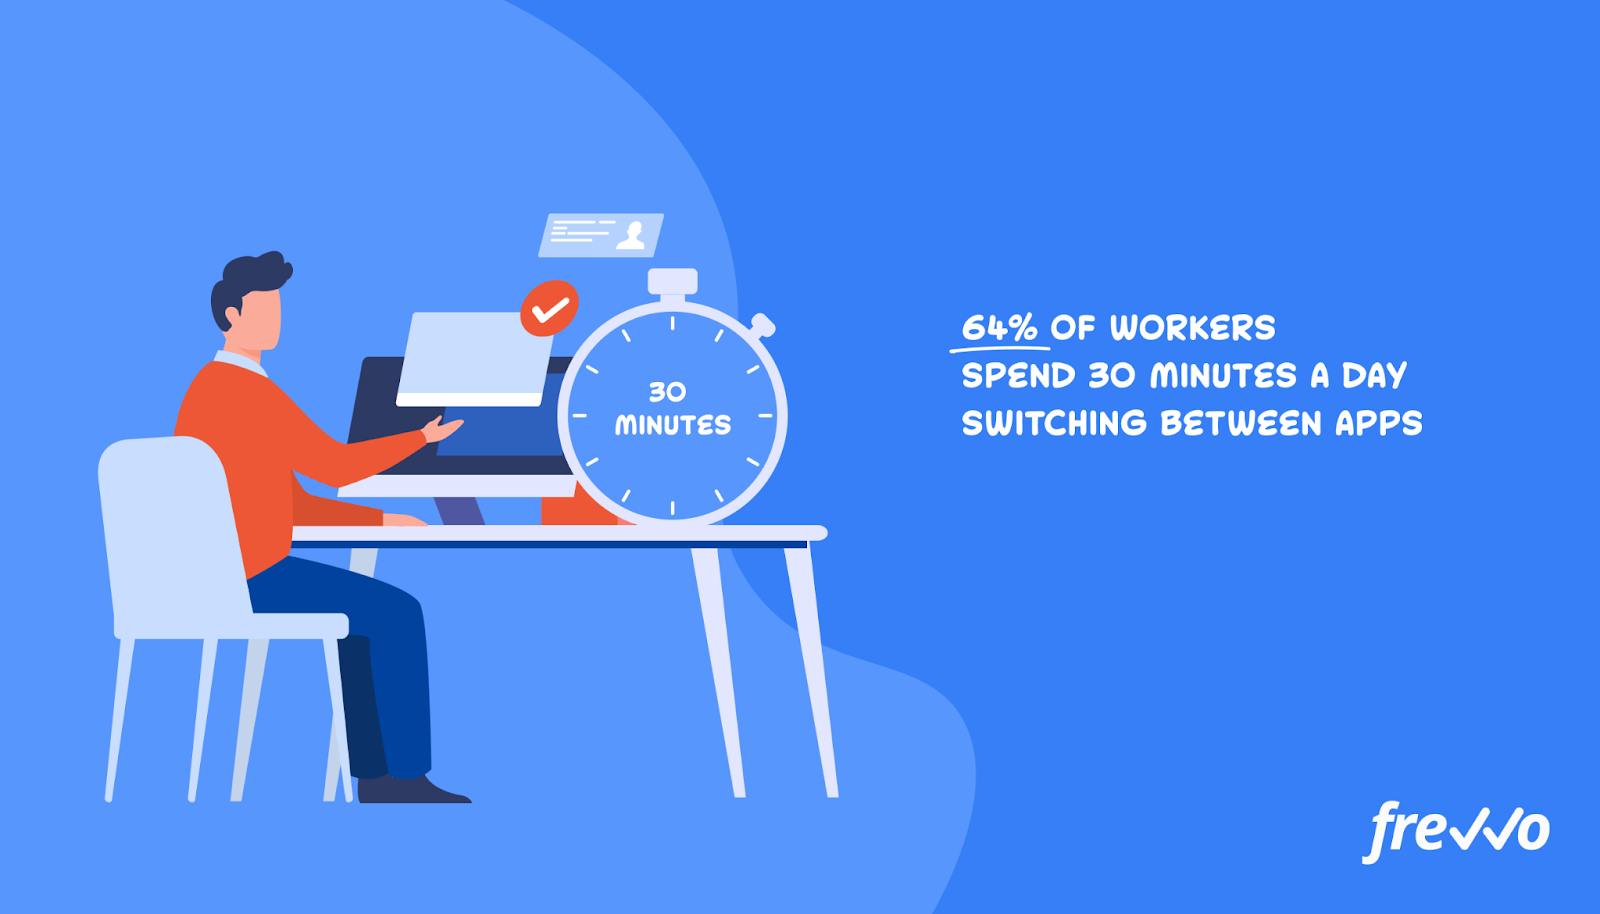 64% of workers spend 30 minutes a day switching between apps